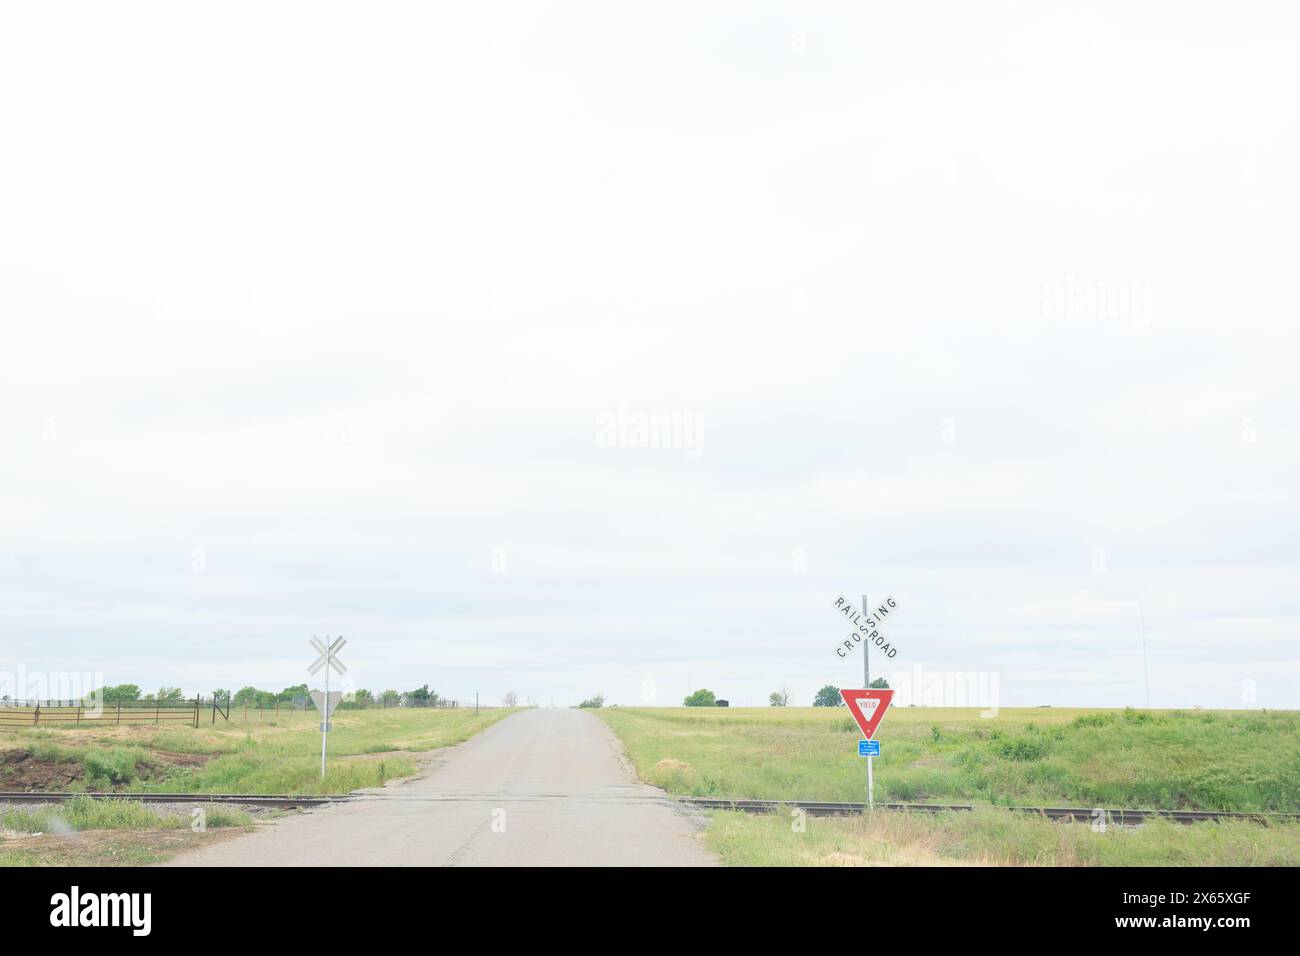 A quiet rural road with a railroad crossing. Stock Photo